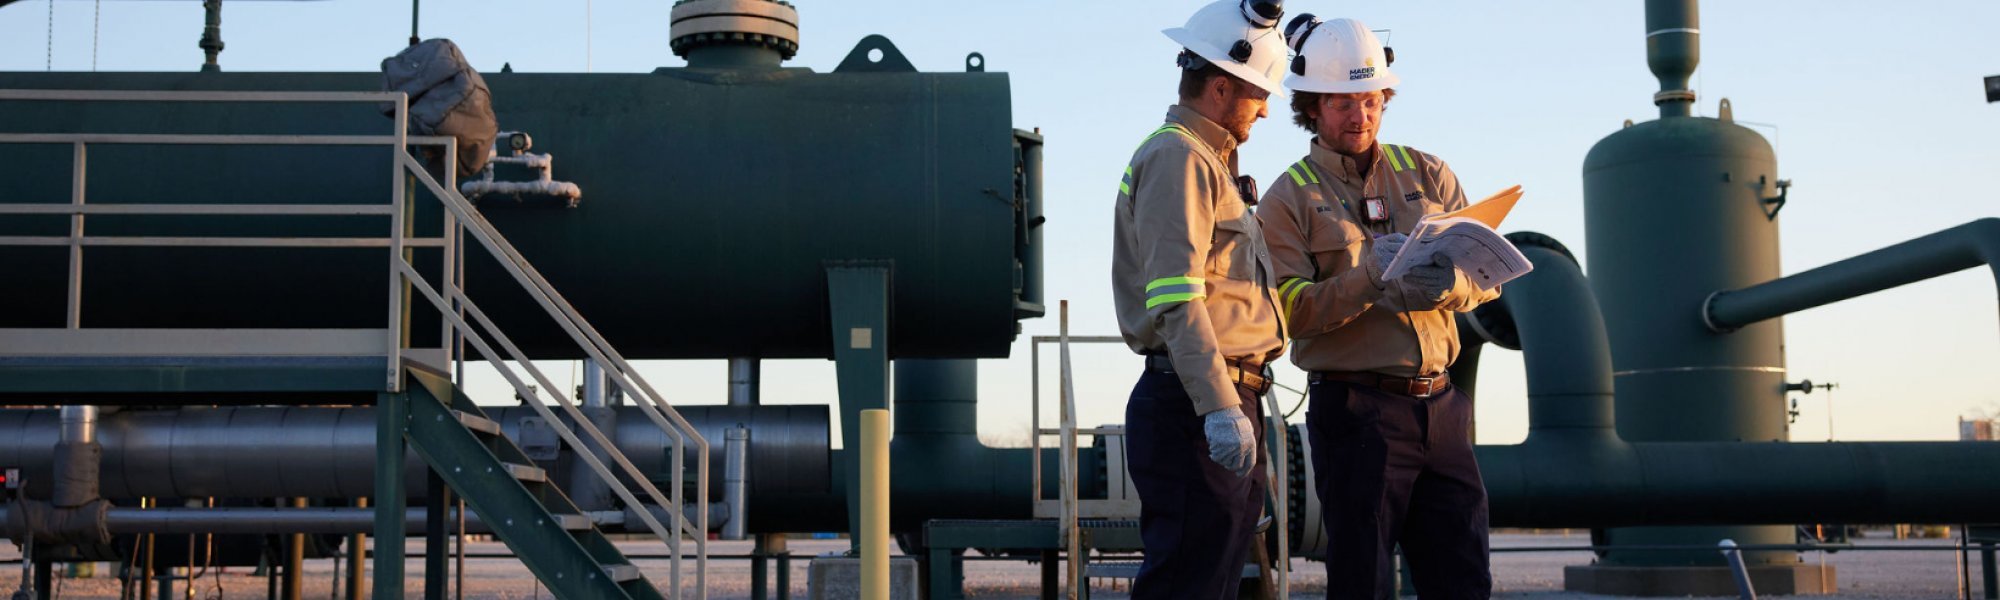 Oil and Gas Services image